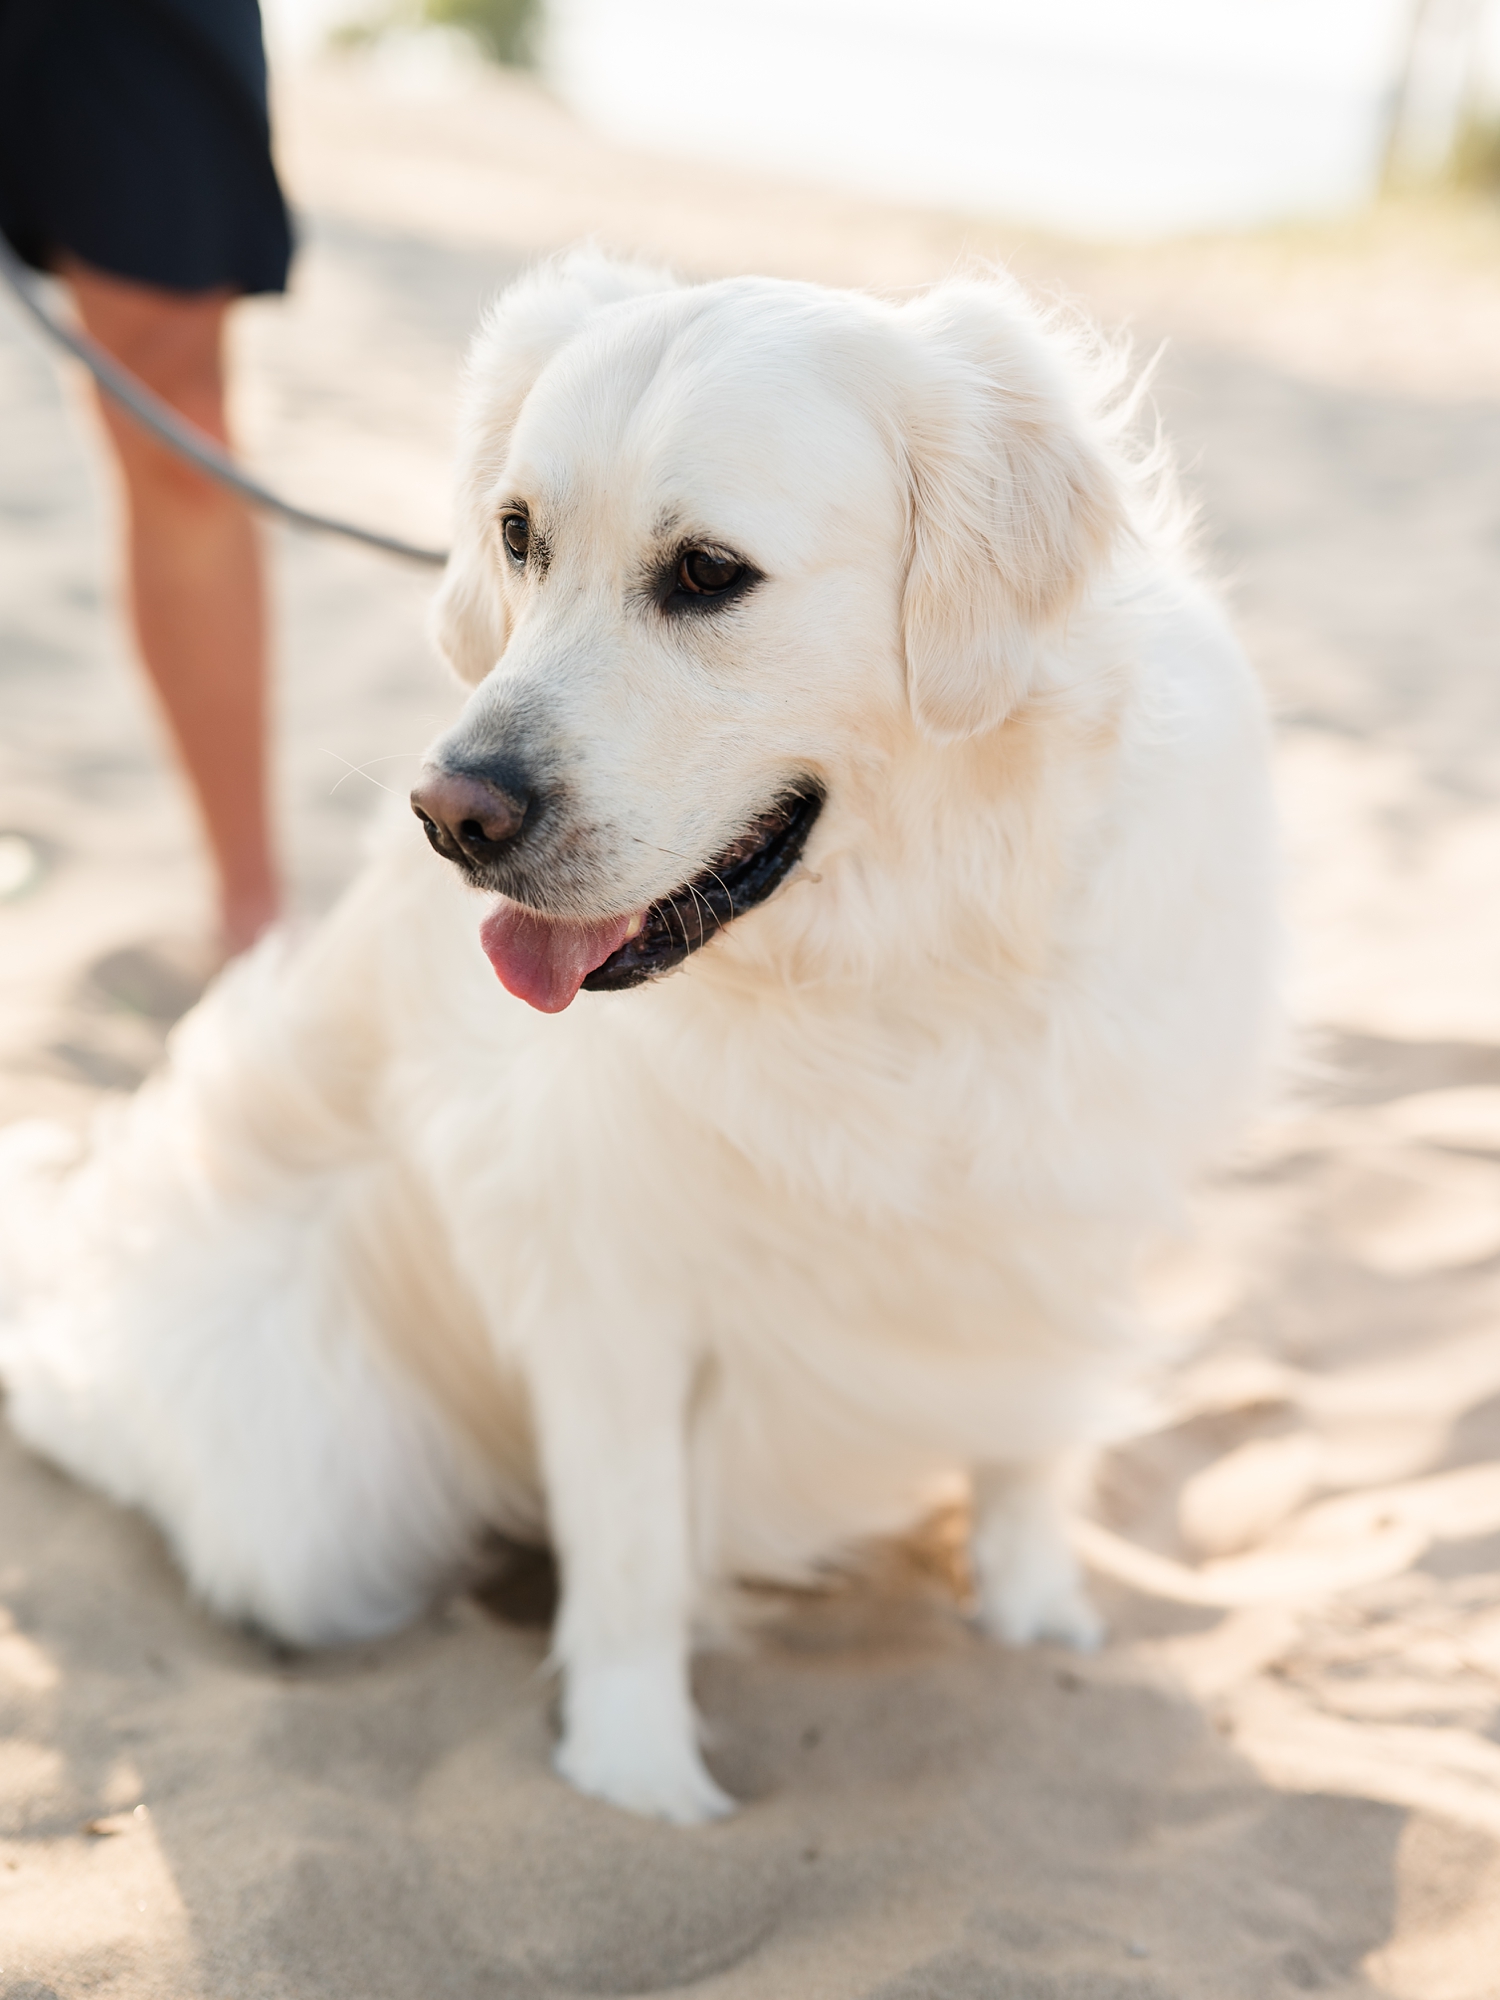 Indiana Dunes Engagement Photos by South Bend Wedding Photographer Courtney Rudicel with golden retriever